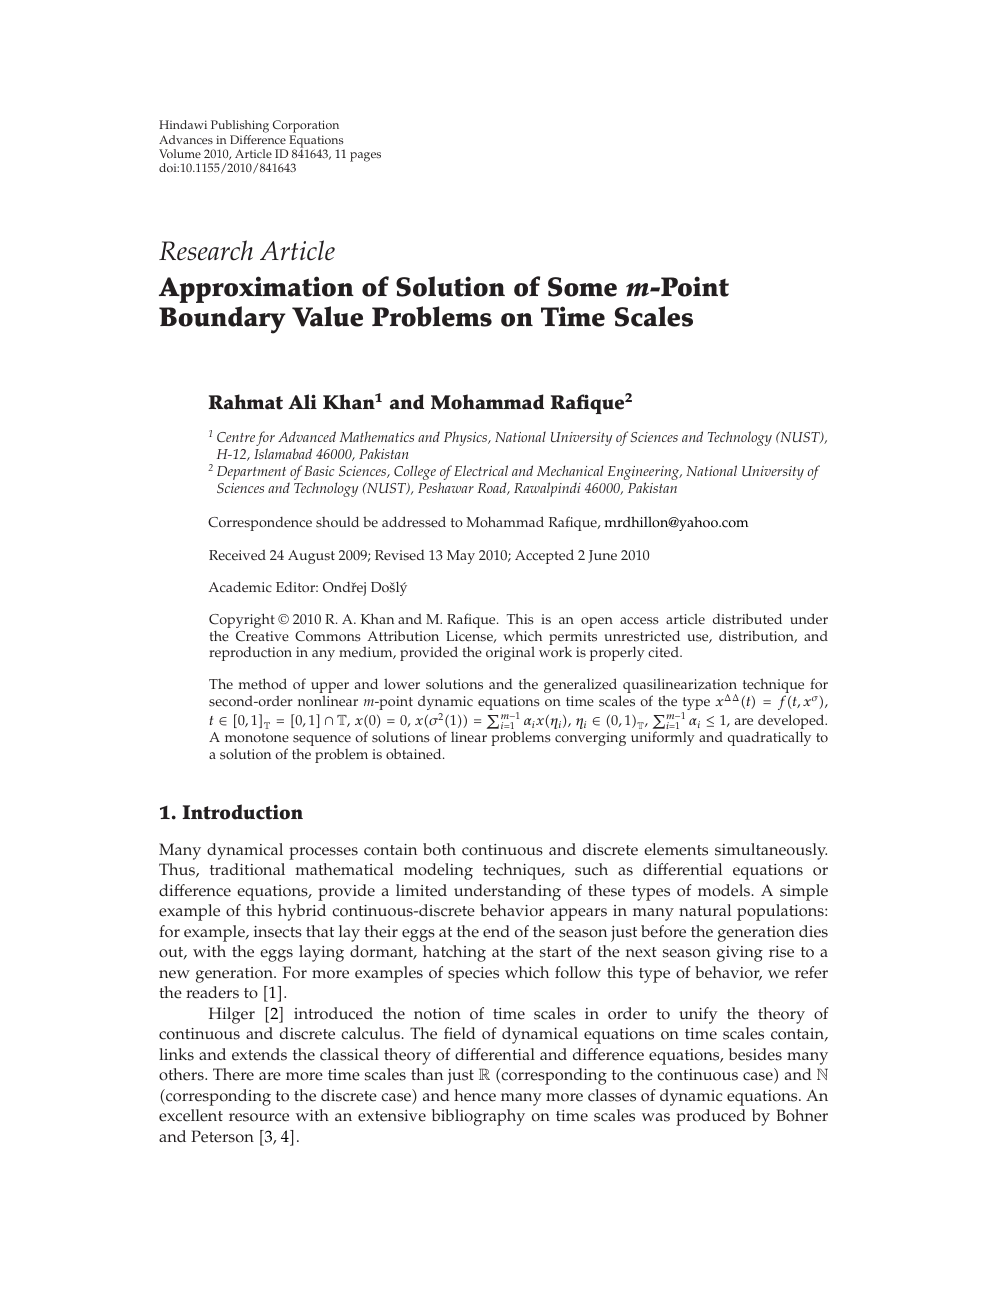 Approximation Of Solution Of Some M Point Boundary Value Problems On Time Scales Topic Of Research Paper In Mathematics Download Scholarly Article Pdf And Read For Free On Cyberleninka Open Science Hub